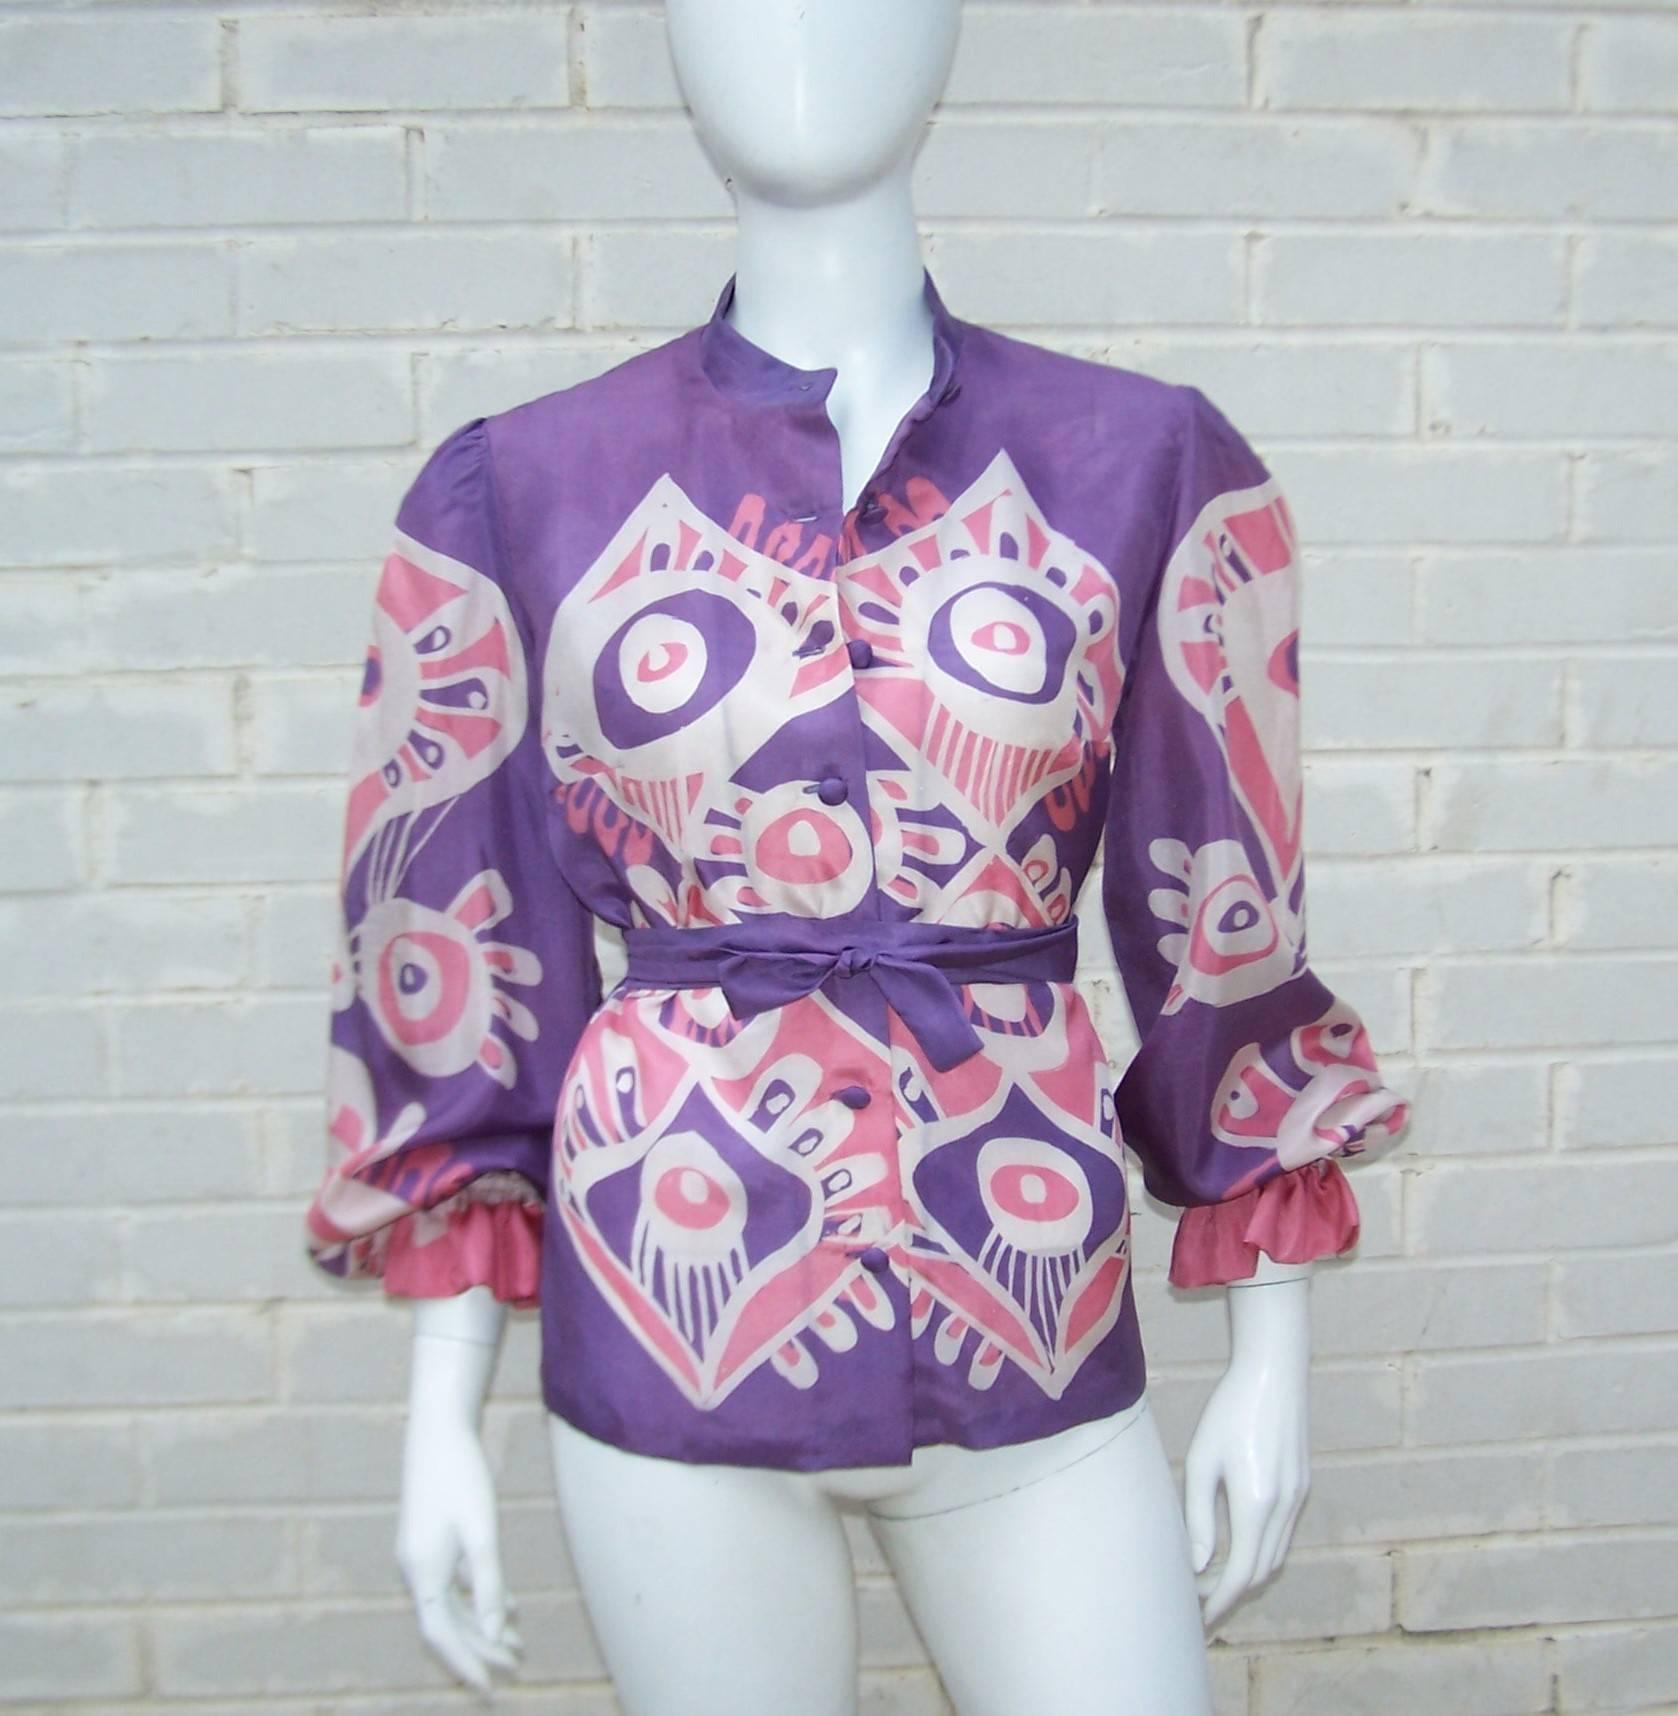 What a great combination of an artisan print and a mod design!  This hand printed silk blouse is reminiscent of Pucci styles from the same era.  The exotic psychedelic print is perfectly offset by the pink, purple and white colors all wrapped up in